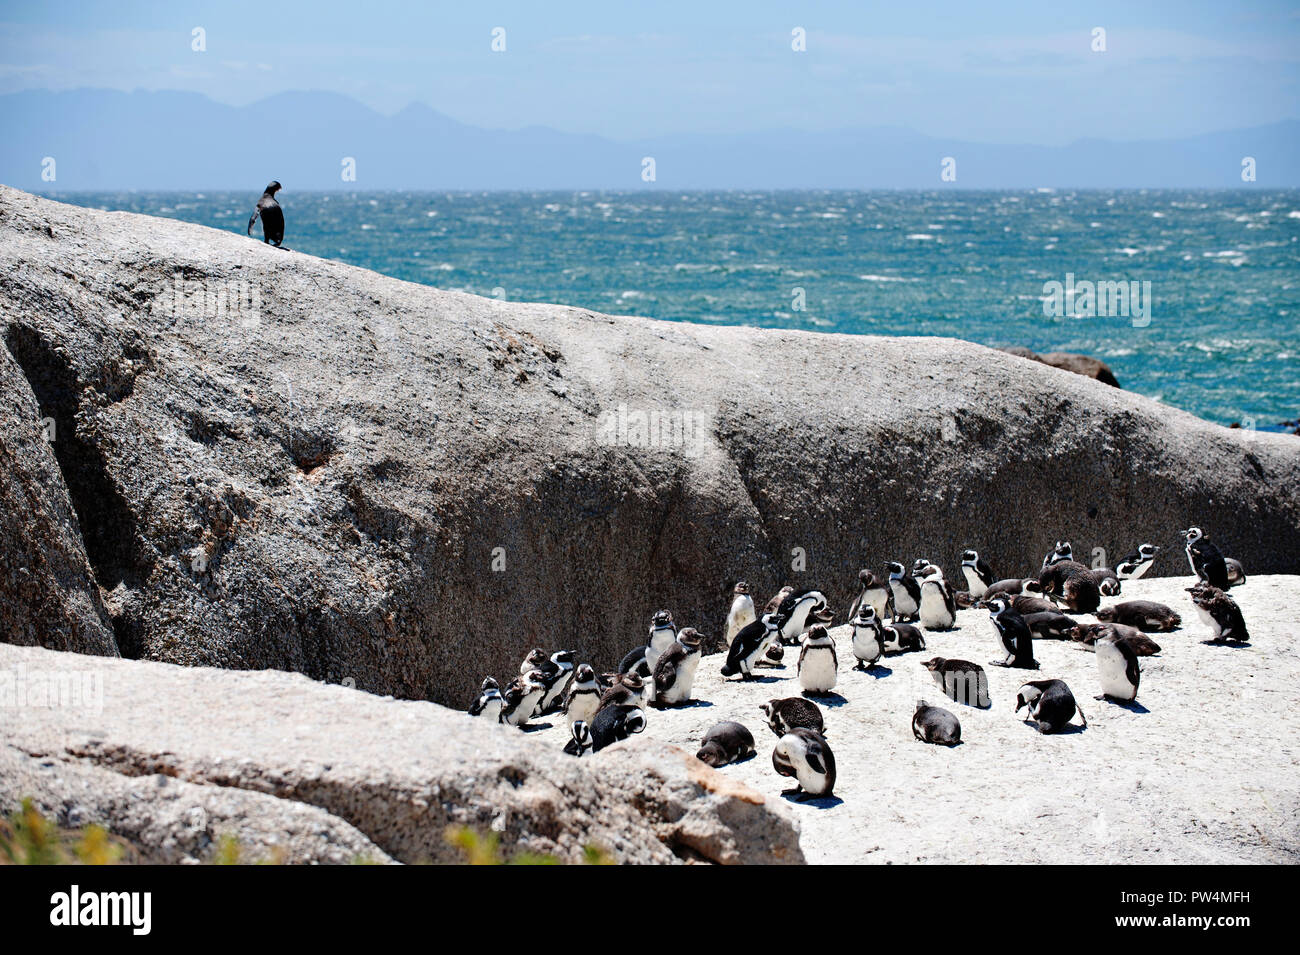 A small colony of Penguins gathering at Boulders Beach, while one penguin steps on to the rock to explore, Cape Town South Africa Stock Photo